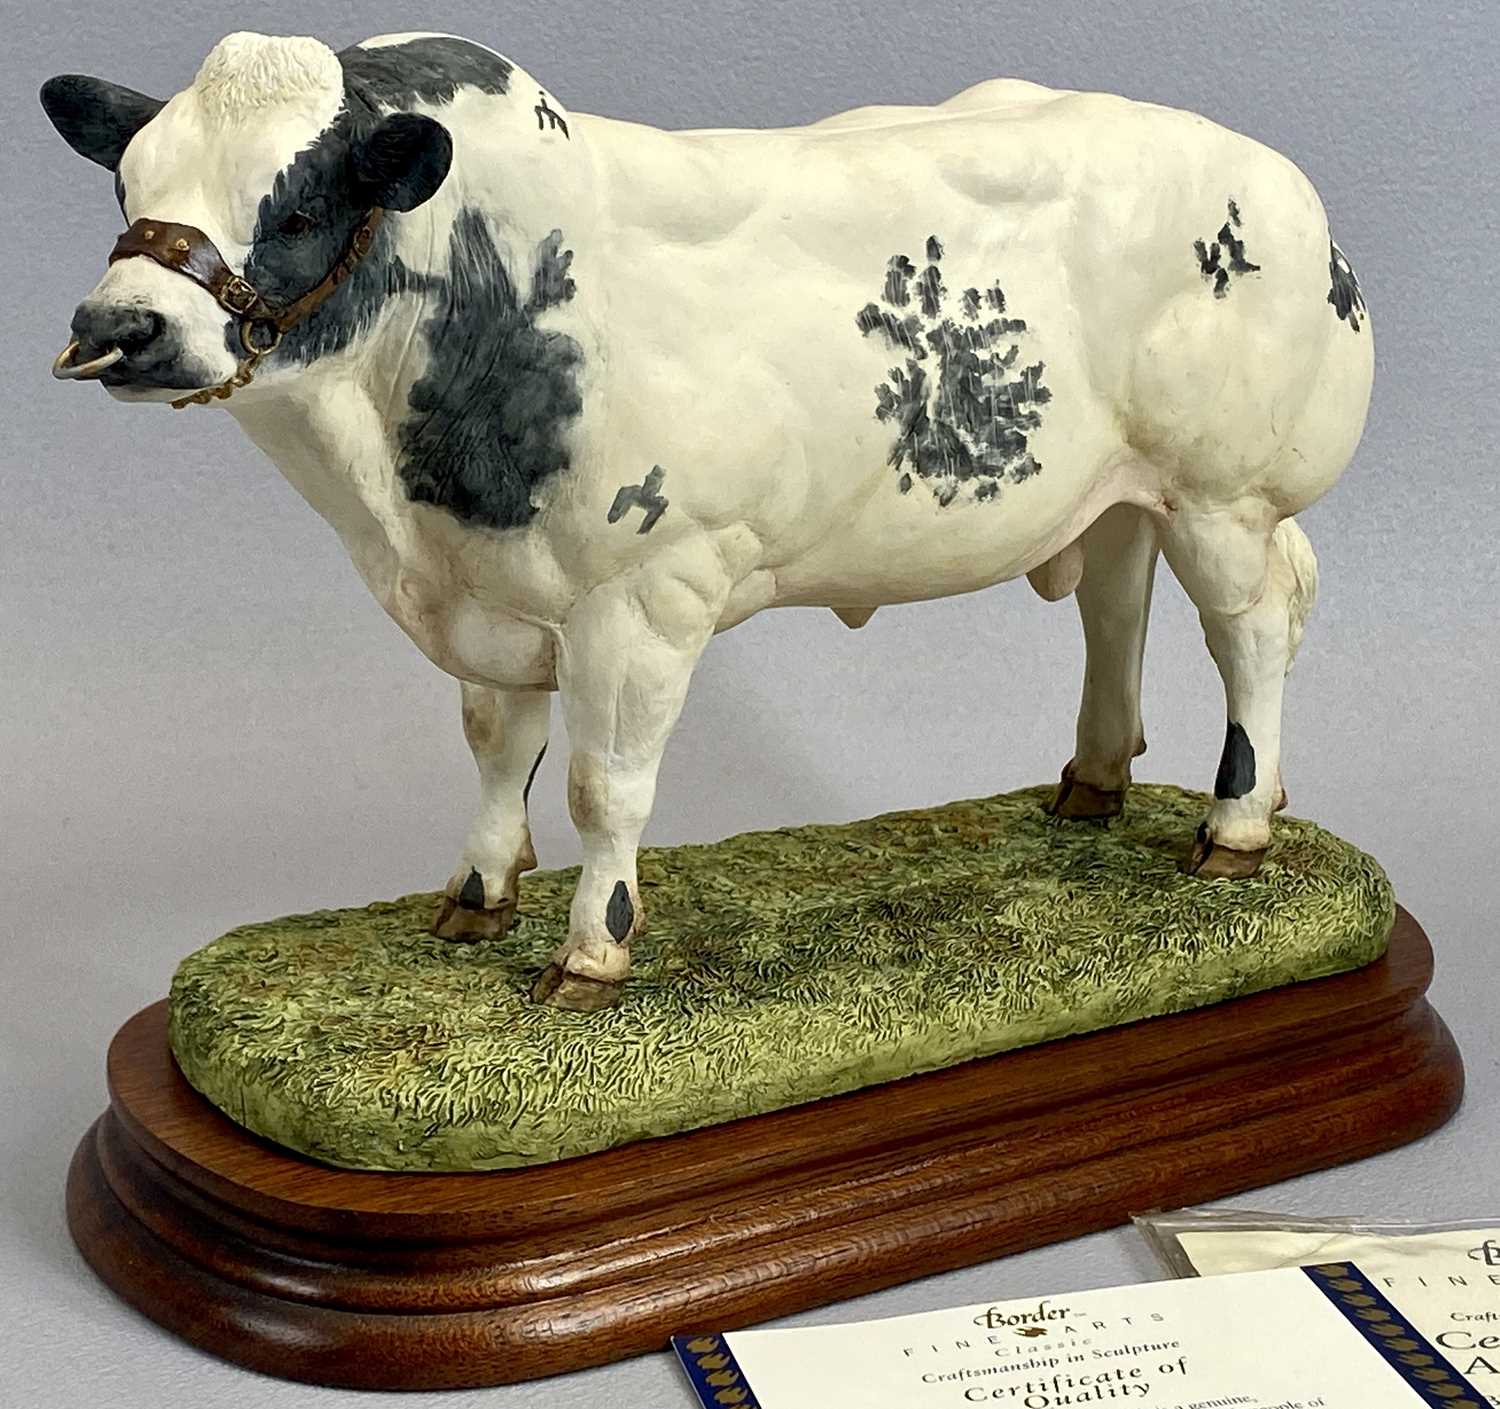 BORDER FINE ARTS FIGURE - Belgian Blue Bull, B0406, on wooden stand, 18cms H, with certificate and